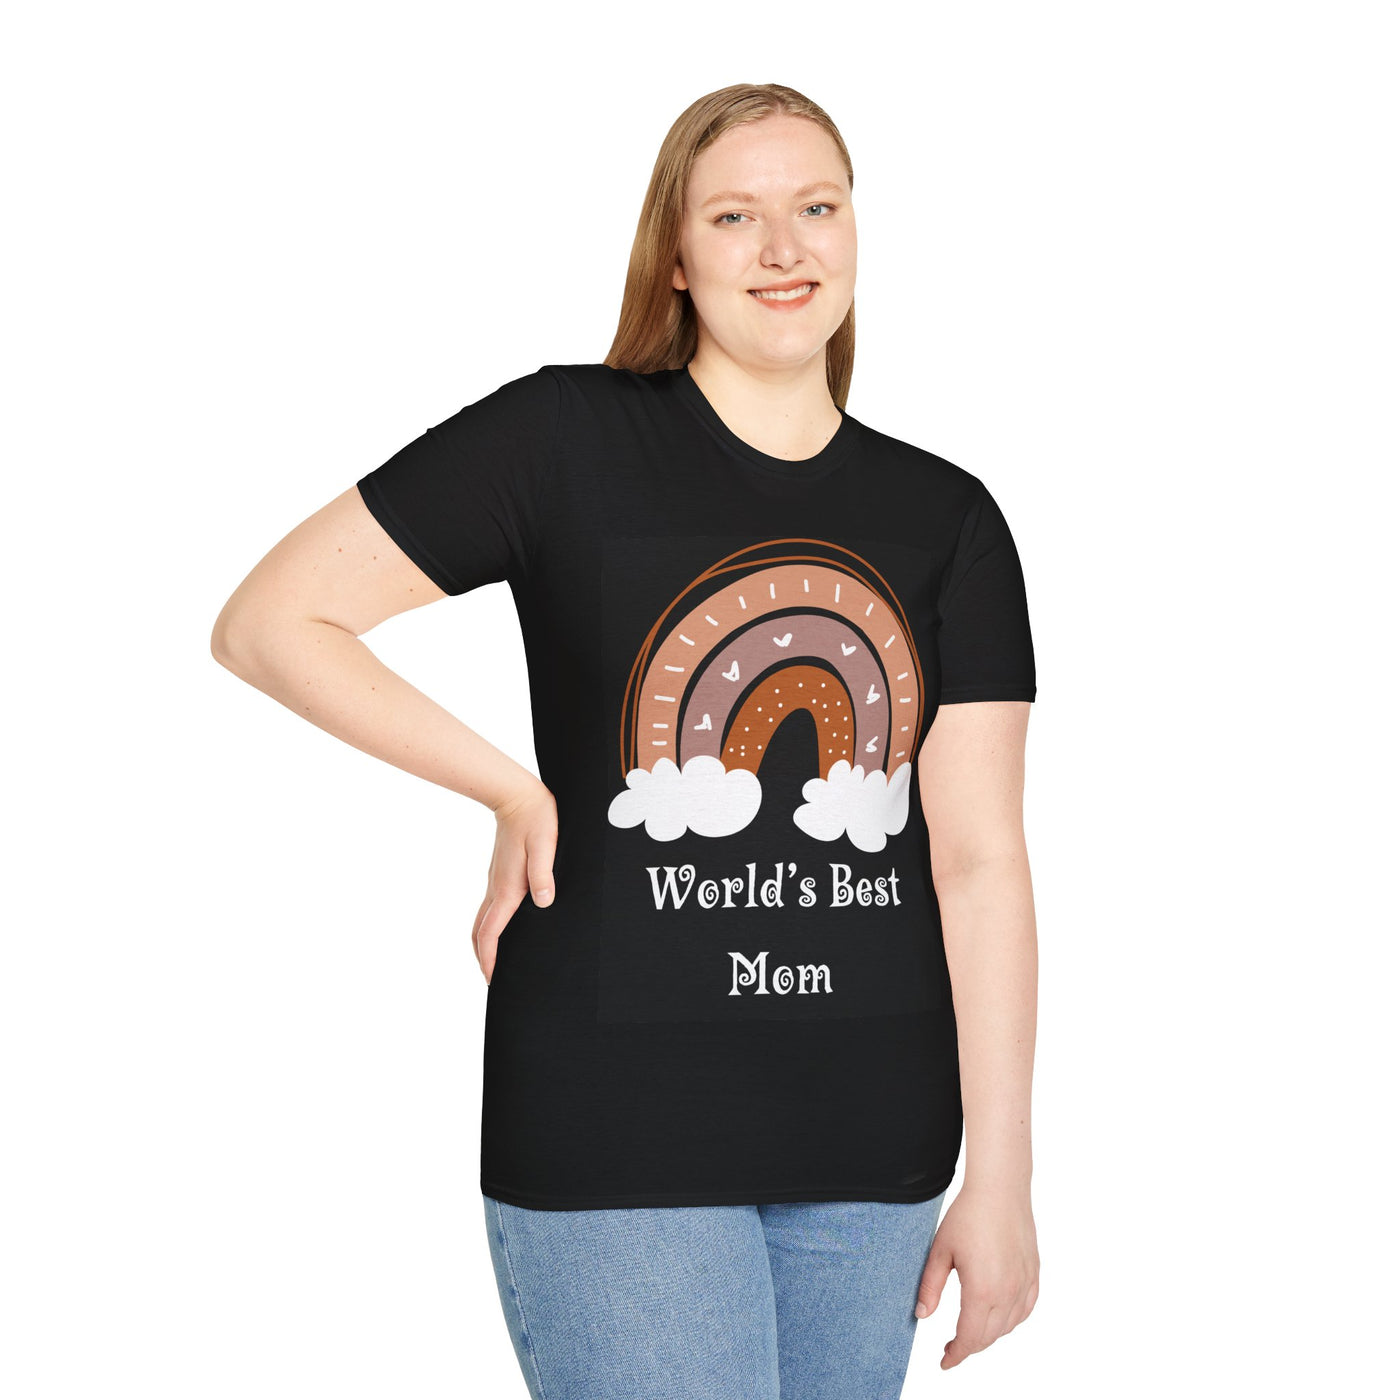 "World's Best Mom" Softstyle T-Shirt